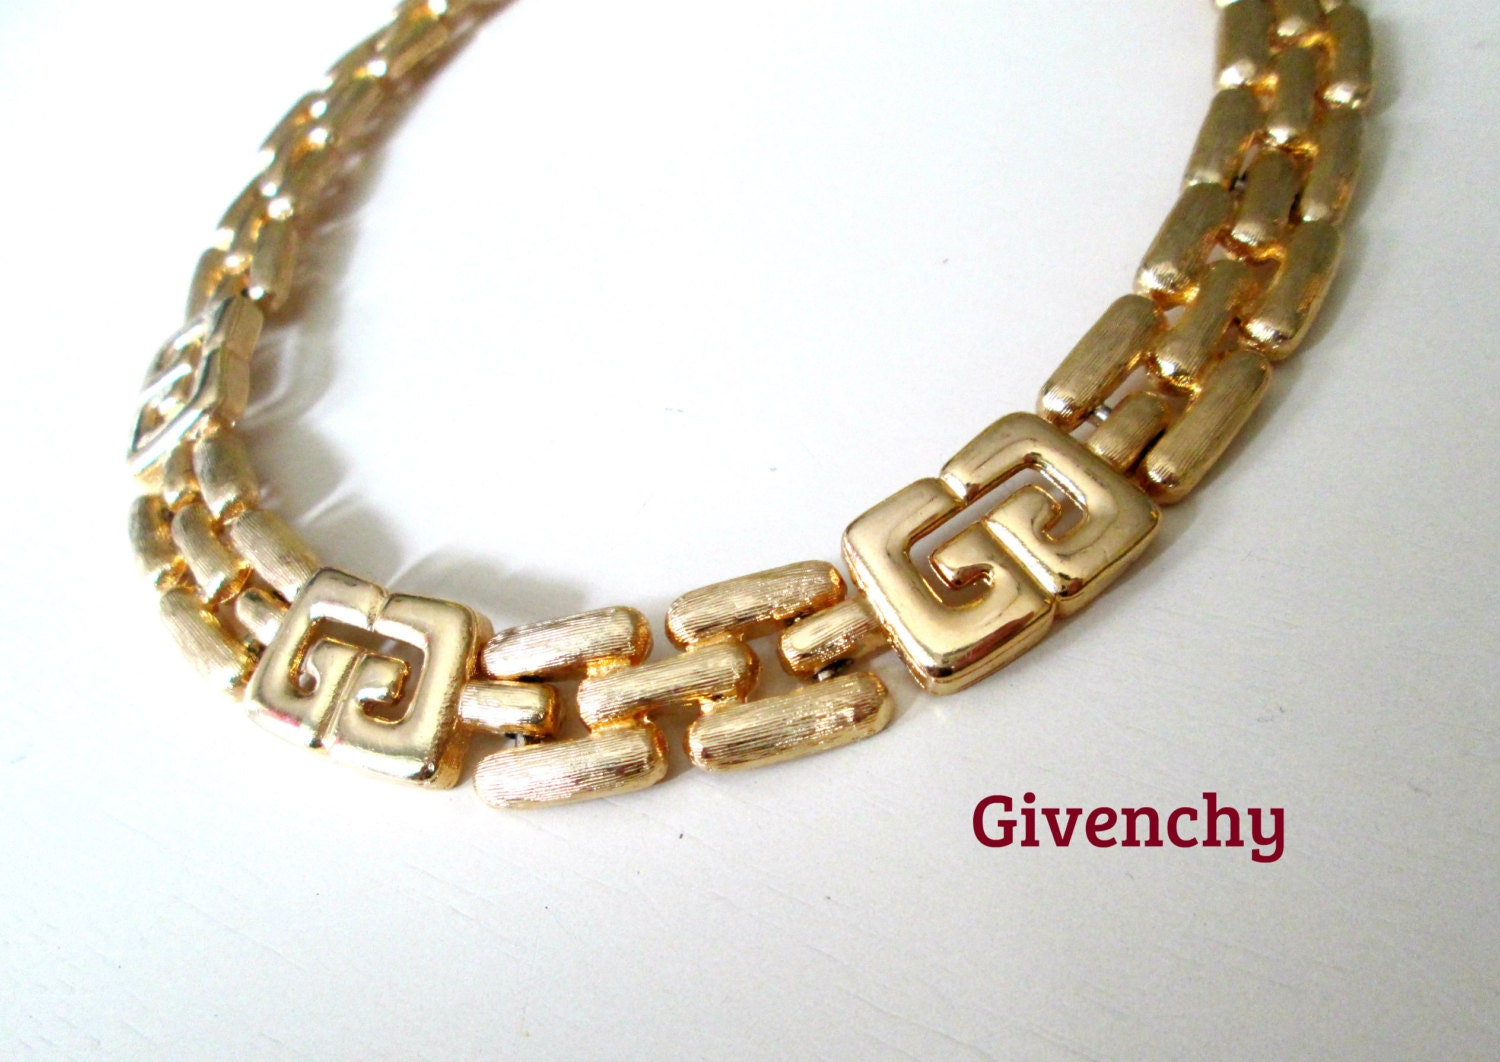 Givenchy G Gold Choker Collar Necklace // Vintage 1970s High